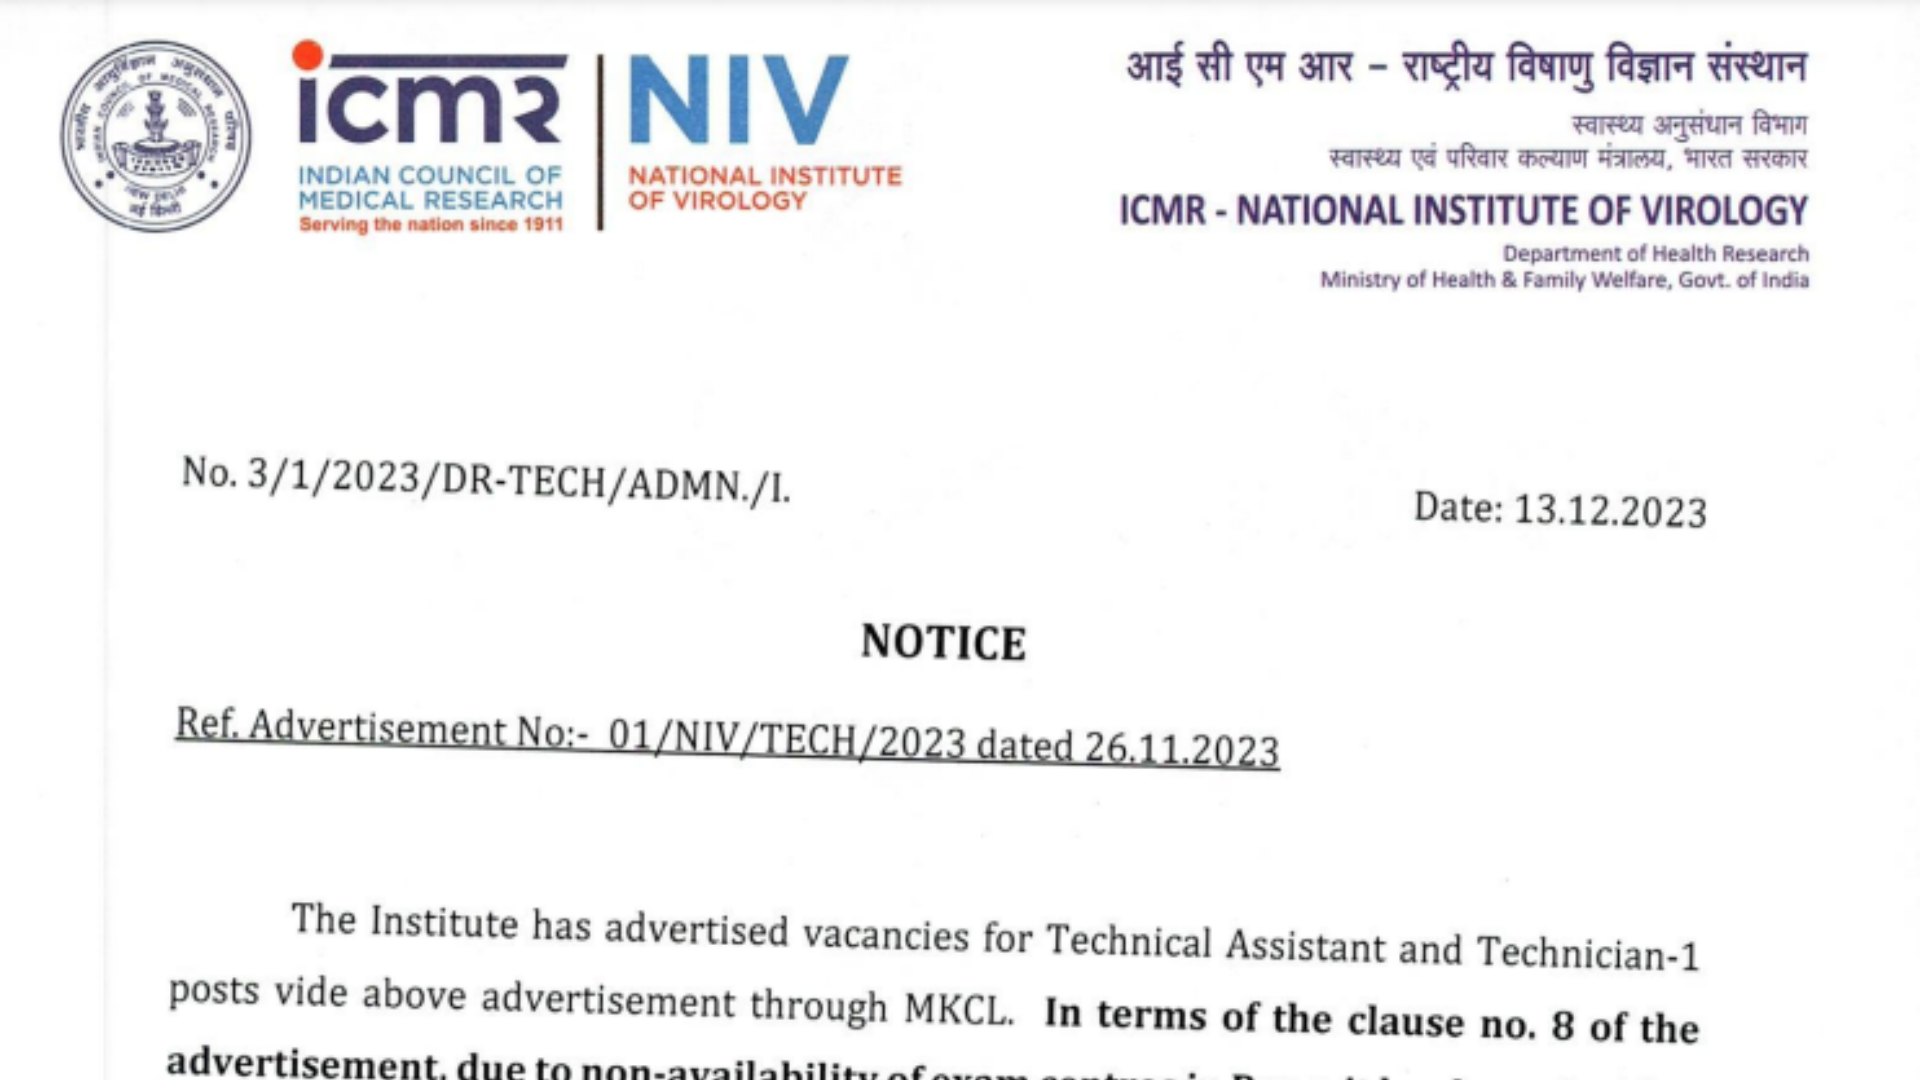 ICMR National Institute of Virology Recruitment 2023 Admit Card for Technical Assistant and Technician Total 80 Post